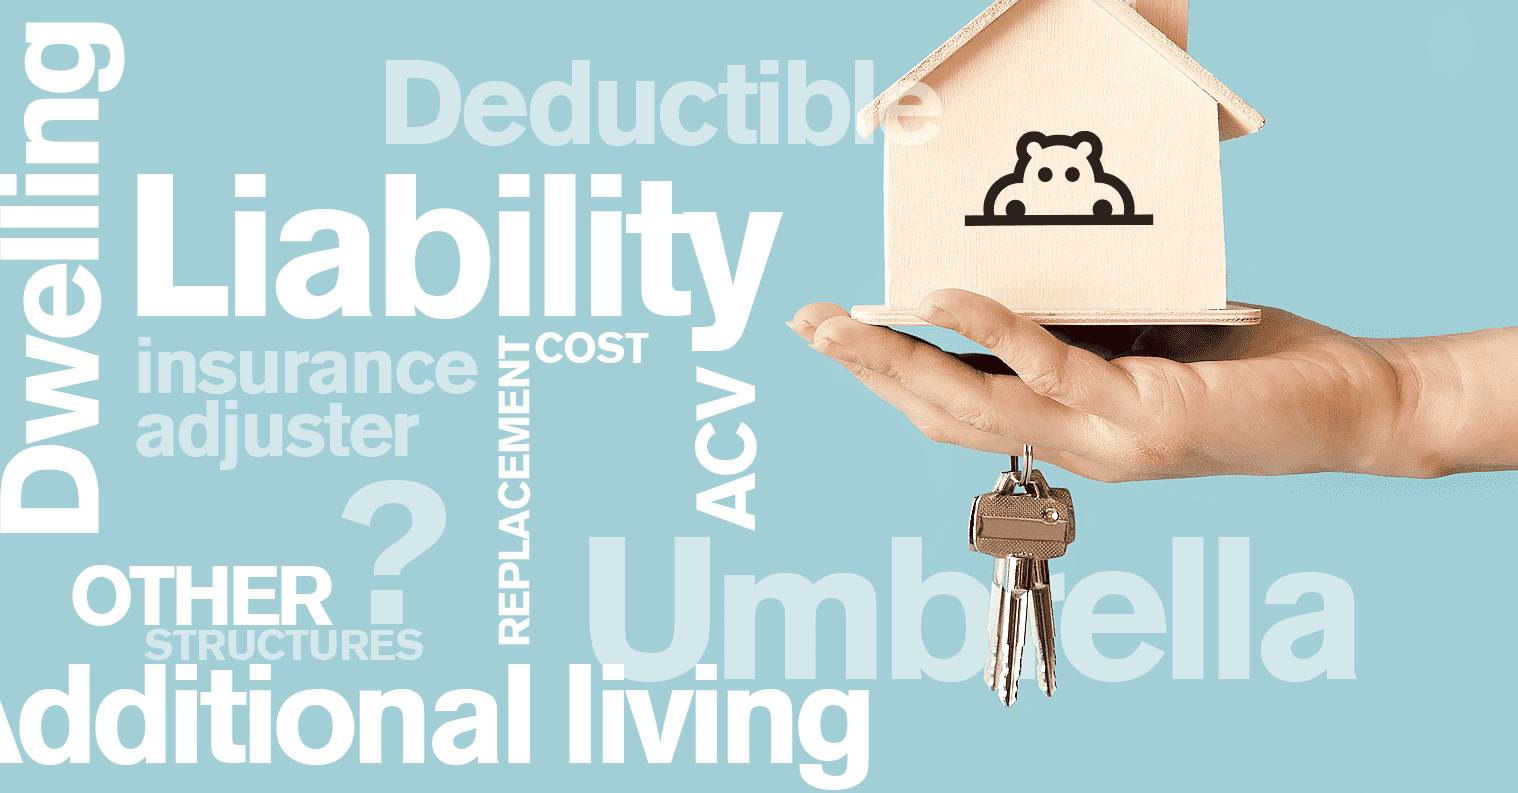 Homeowners insurance terms and definitions